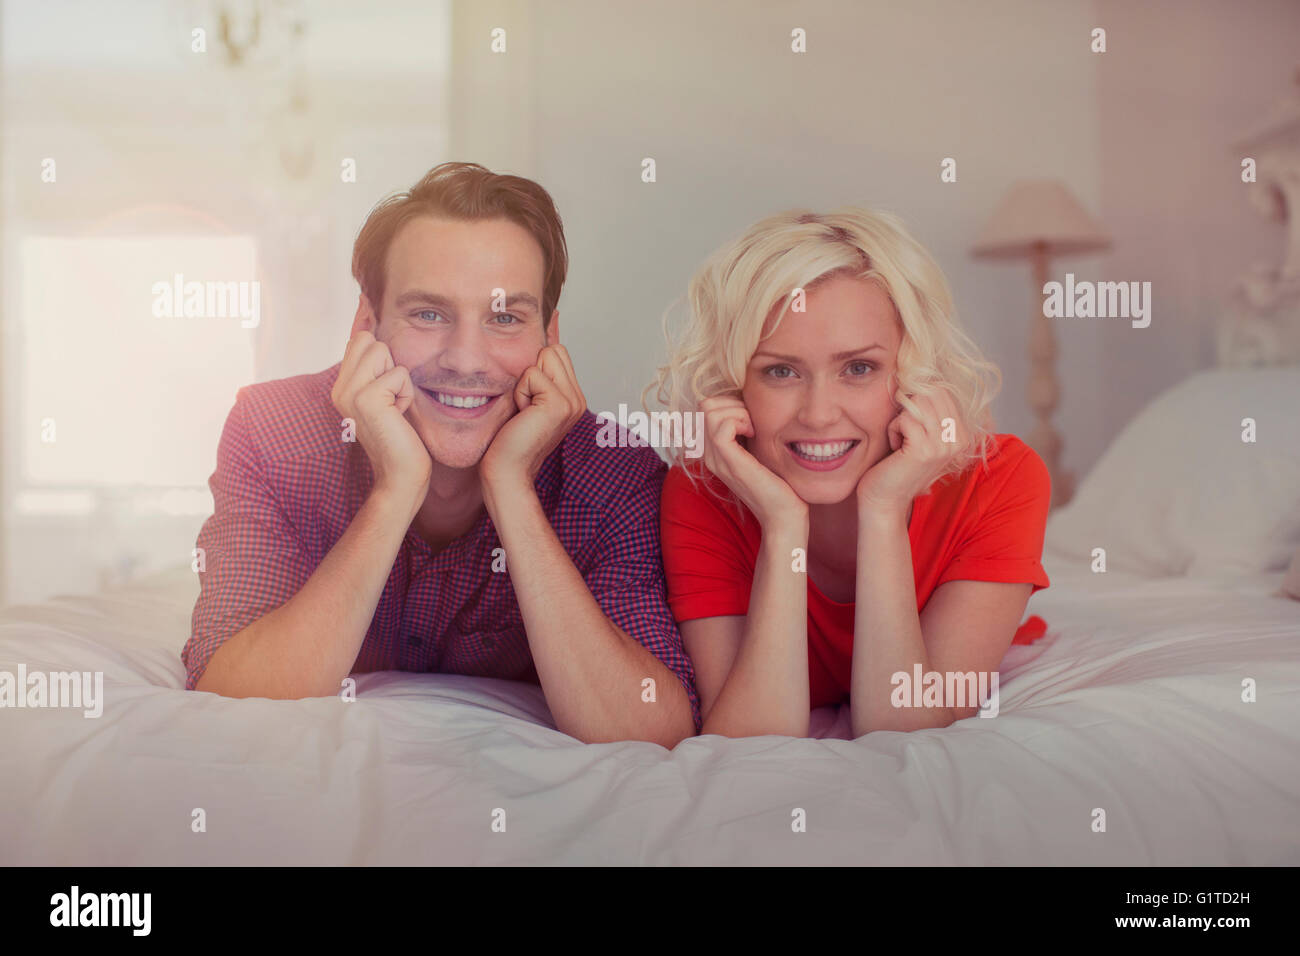 Portrait smiling couple with head in hands on bed Stock Photo